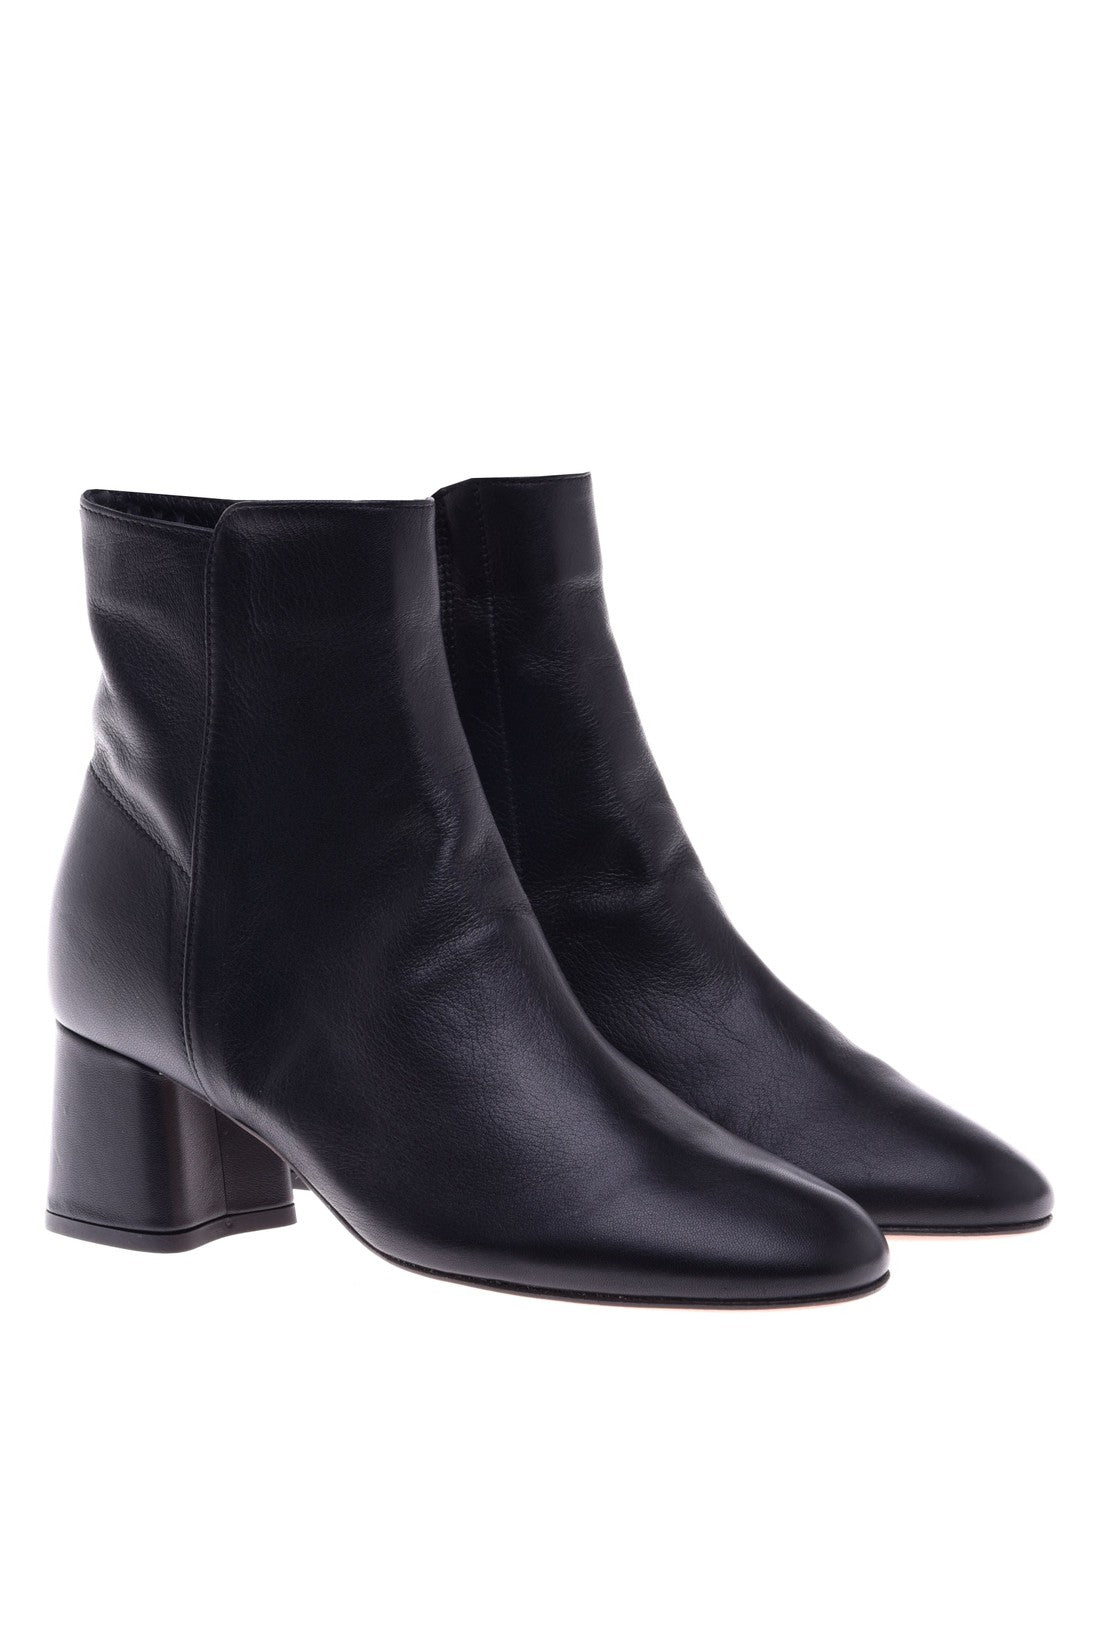 BALDININI-OUTLET-SALE-Ankle-boot-in-black-nappa-leather-Stiefel-Stiefeletten-ARCHIVE-COLLECTION-3_ca9d6ee8-baaf-4e0b-bbfc-17769fb8a97b.jpg